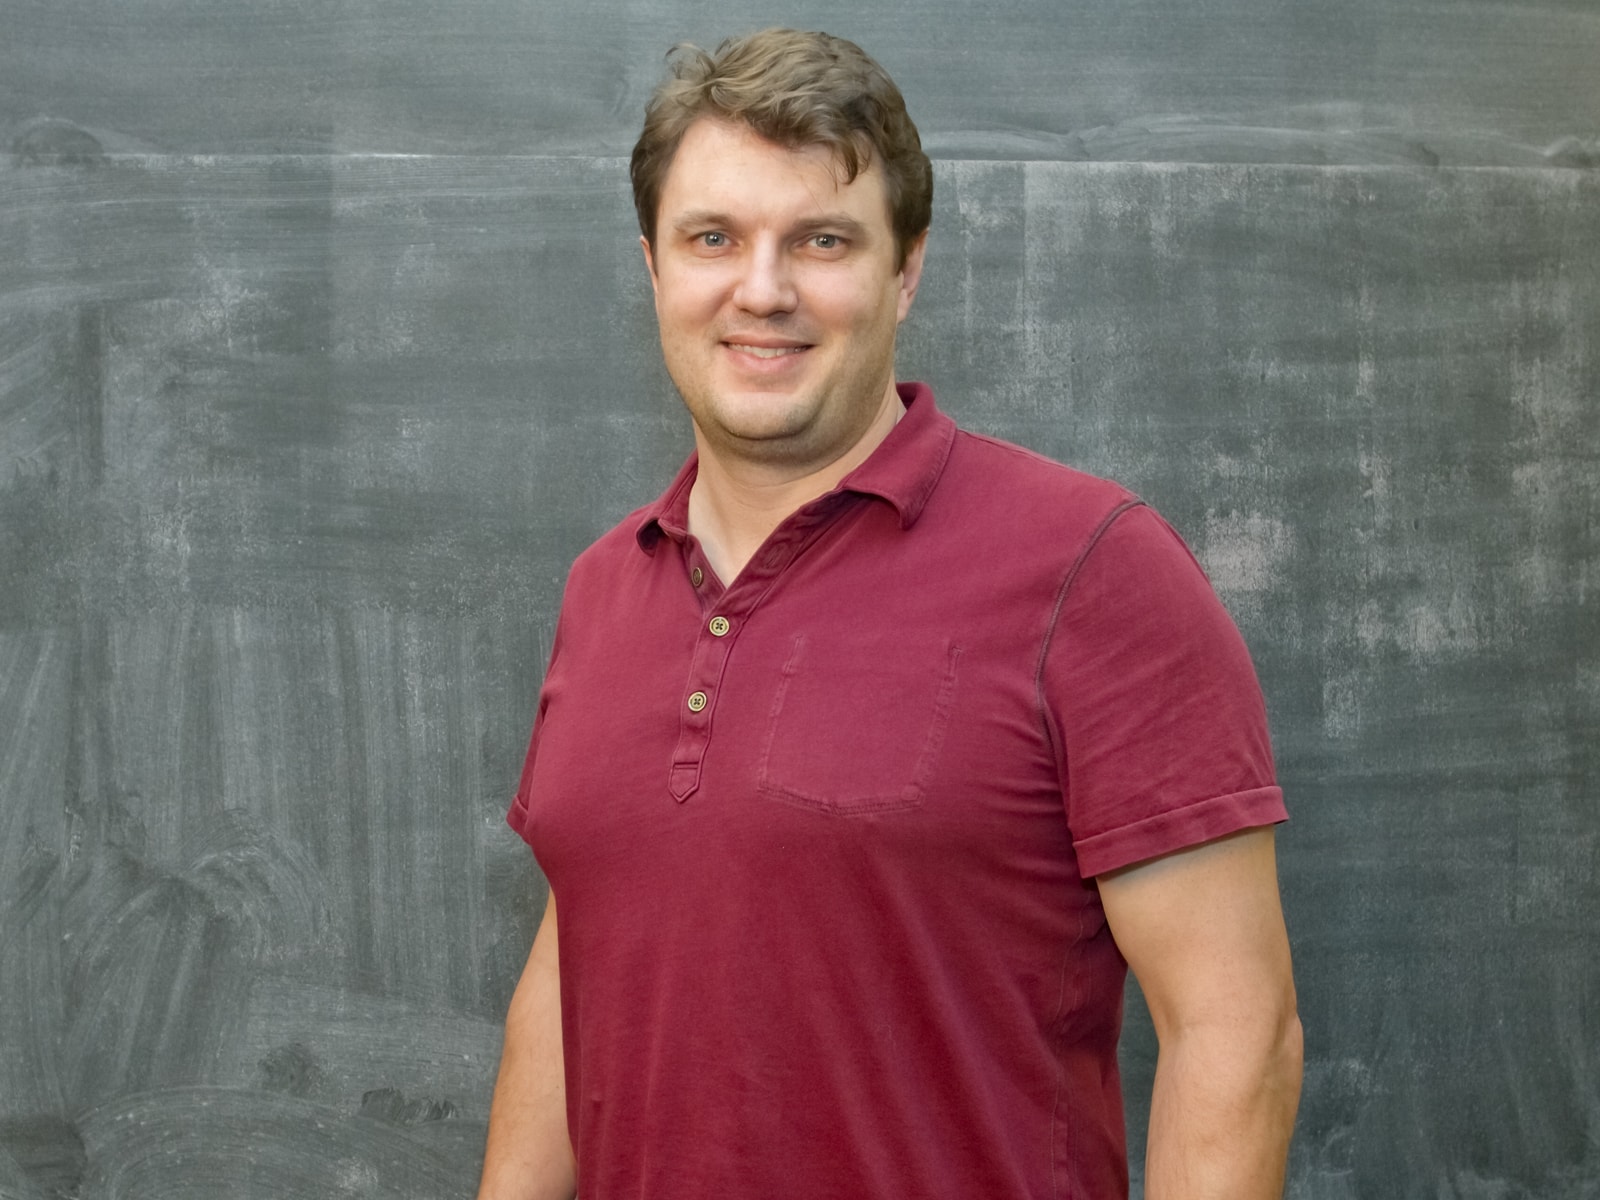 DigiPen physics professor Charles Duba smiling in front of a blackboard